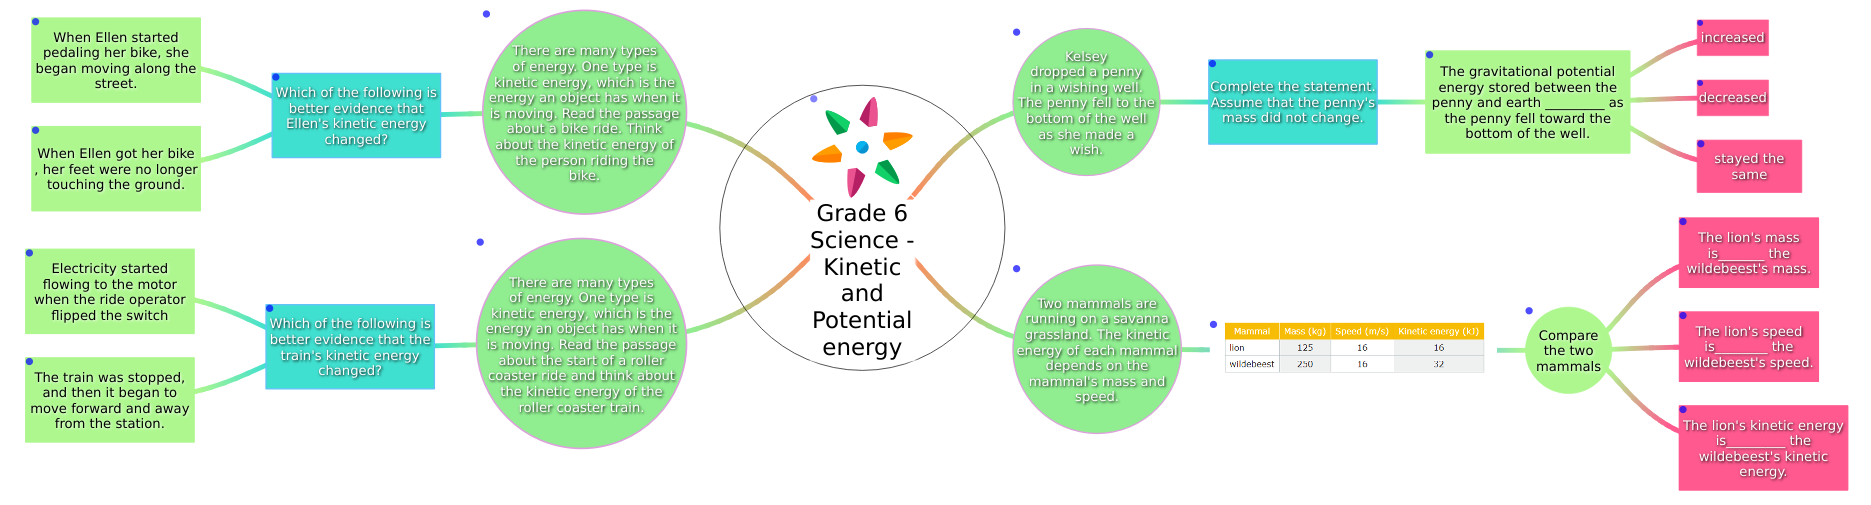 Grade 6 Science Kinetic and Potential Energy mind map